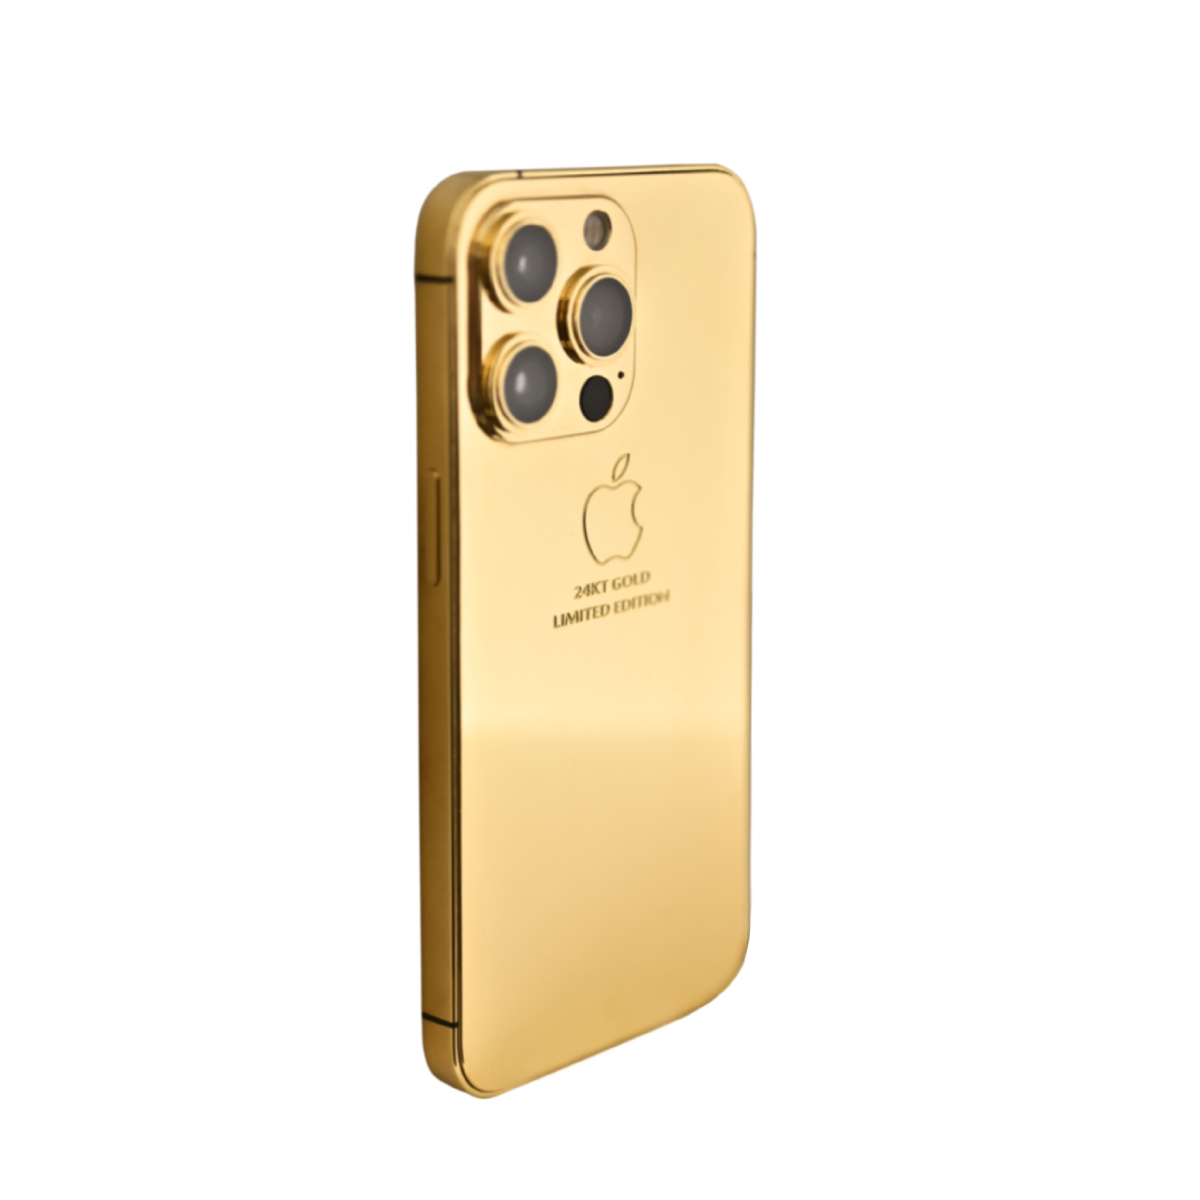 Caviar Luxury 24k Full Gold Customized iPhone 14 Pro Max 128 GB Limited Edition